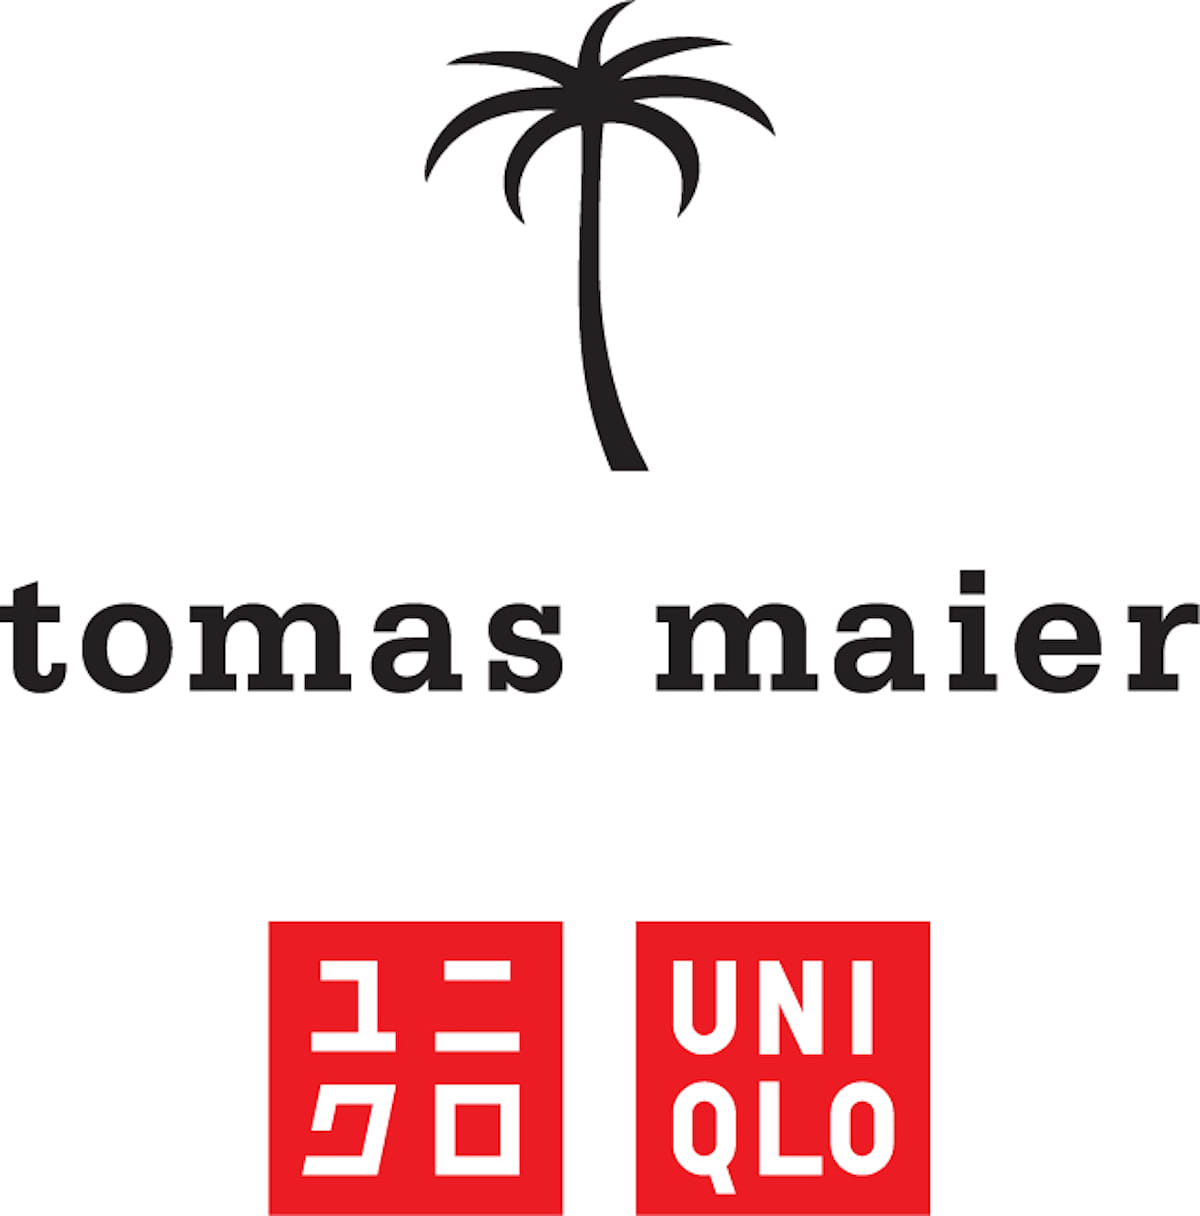 tomas maier and uniqlo